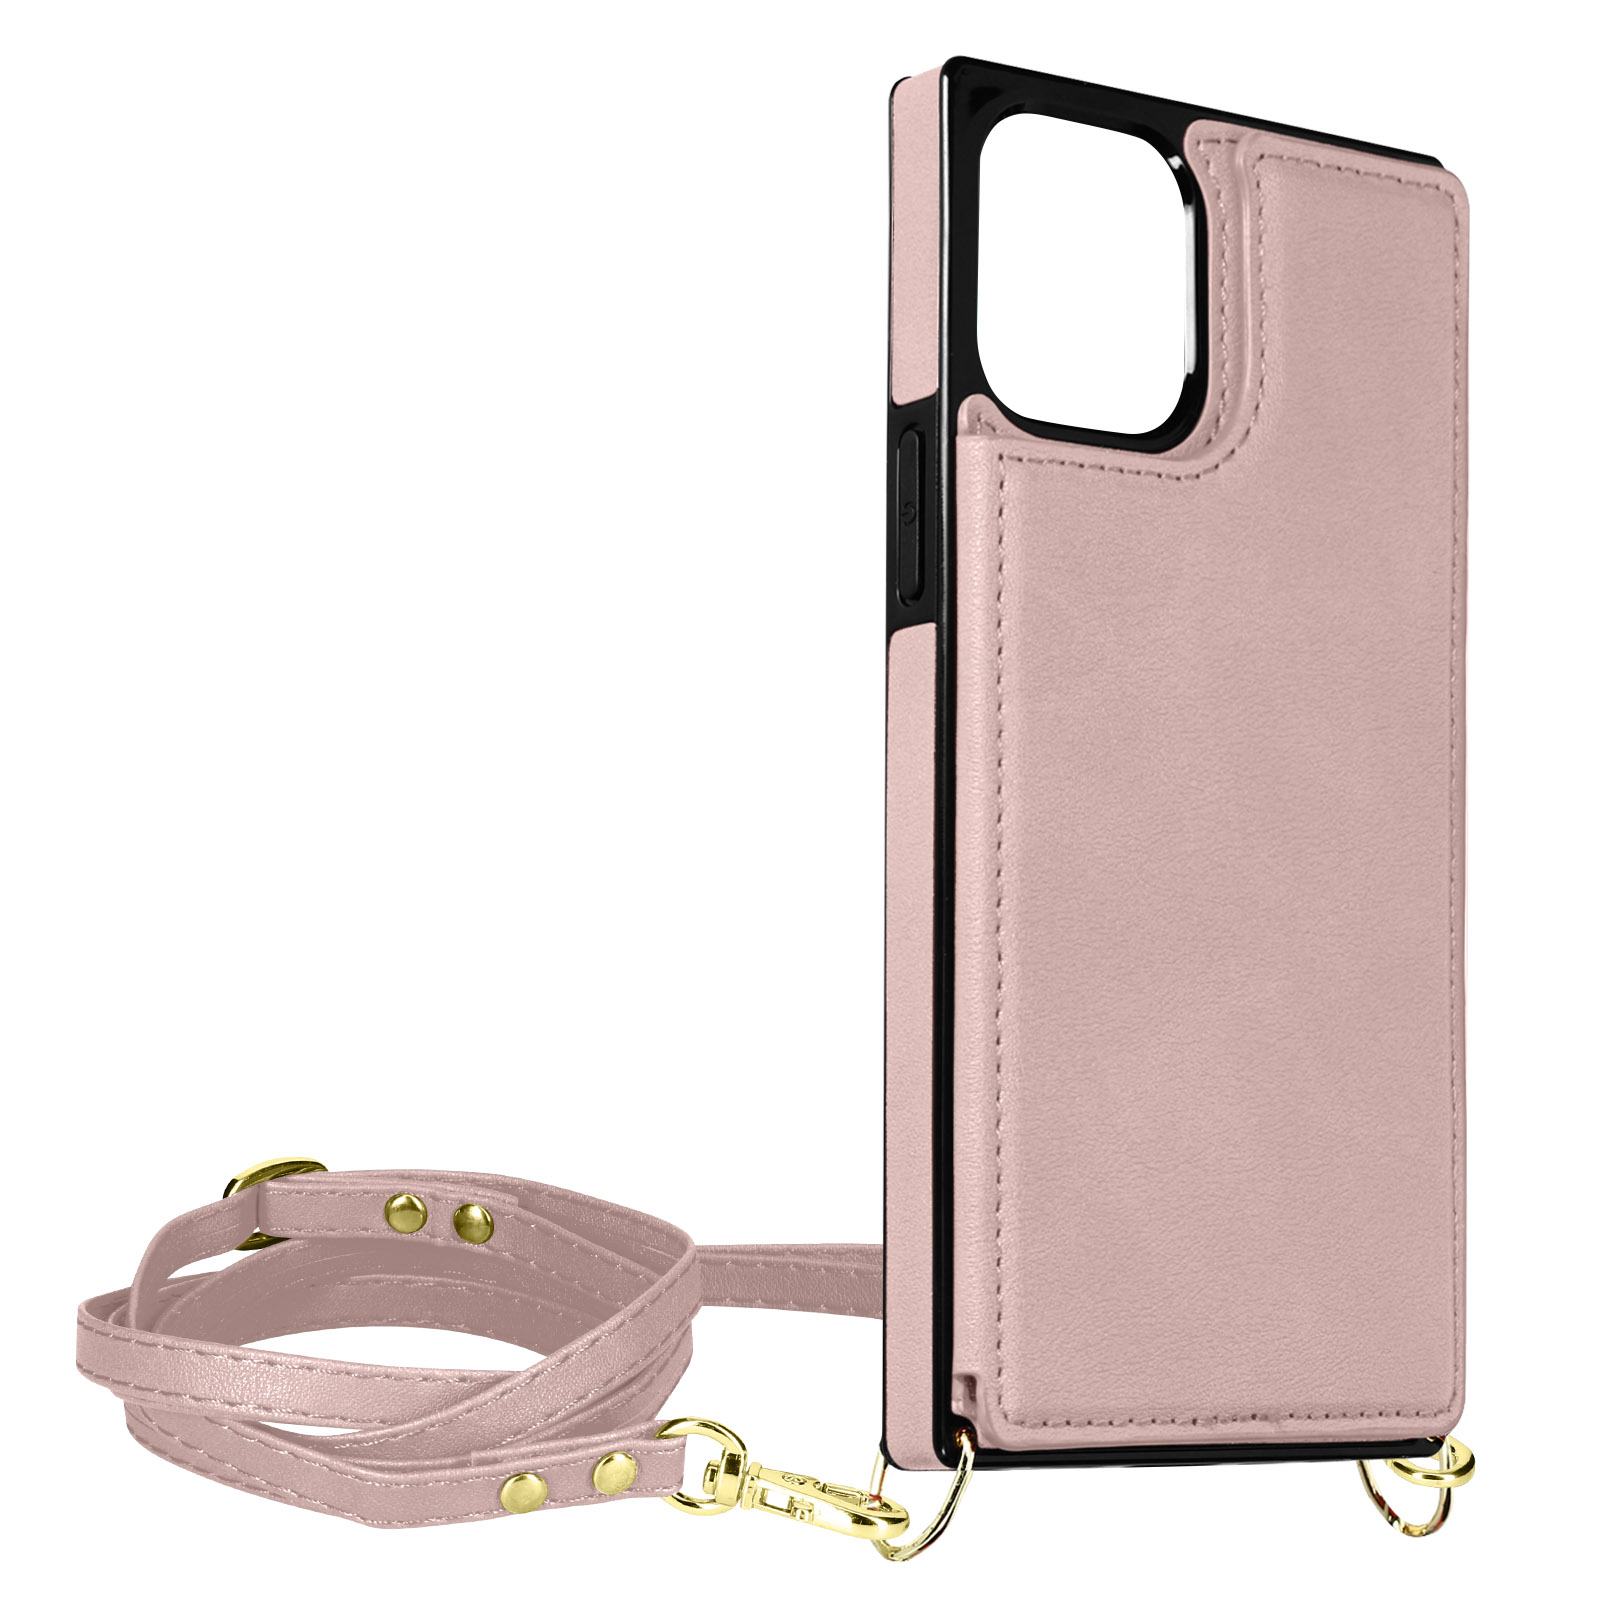 AVIZAR Darling Series, 12 Rosegold Pro Max, Apple, iPhone Backcover